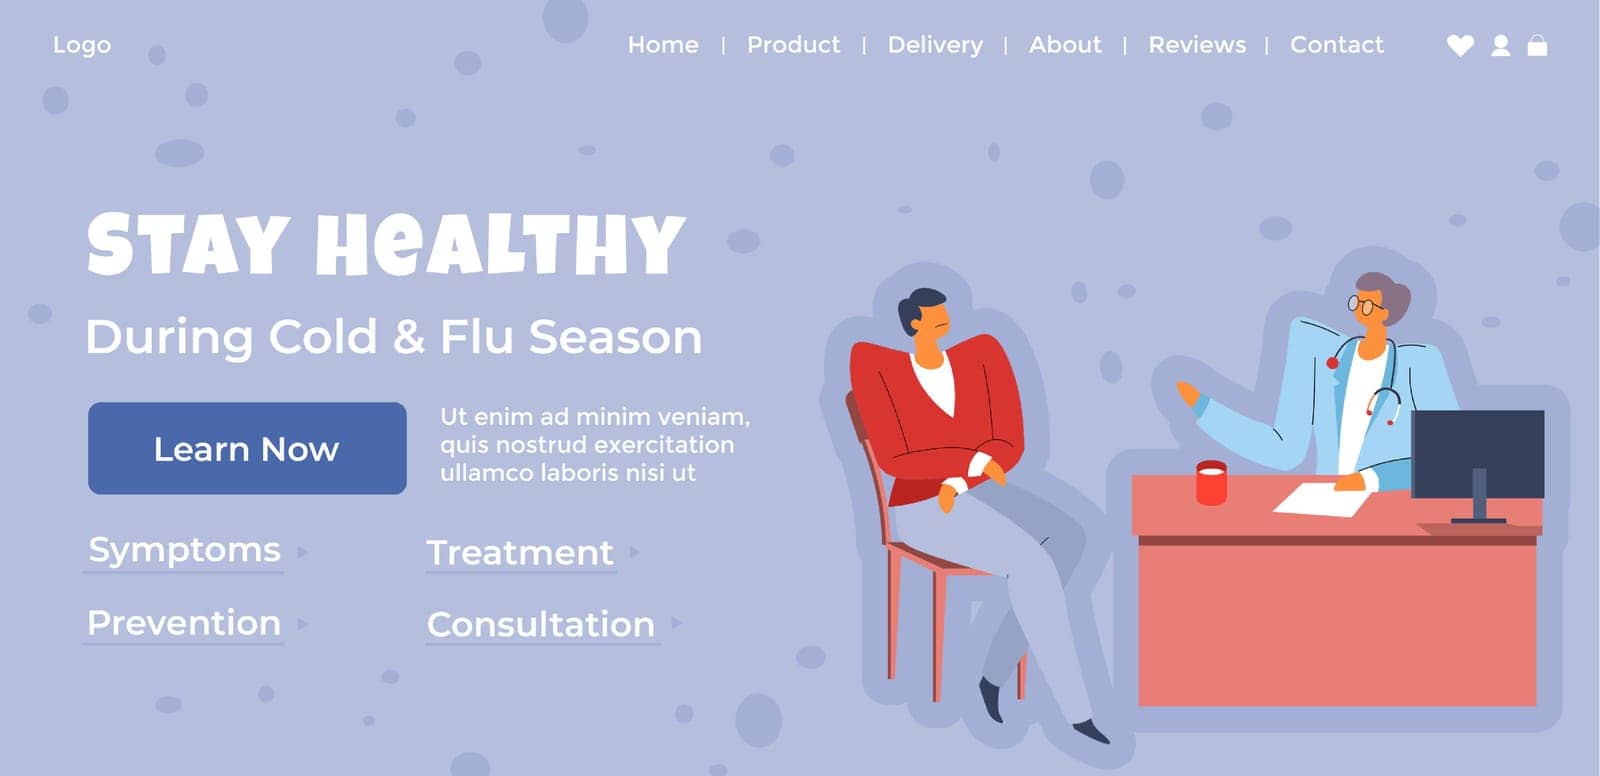 Stay healthy during cold and flu season website by Sonulkaster